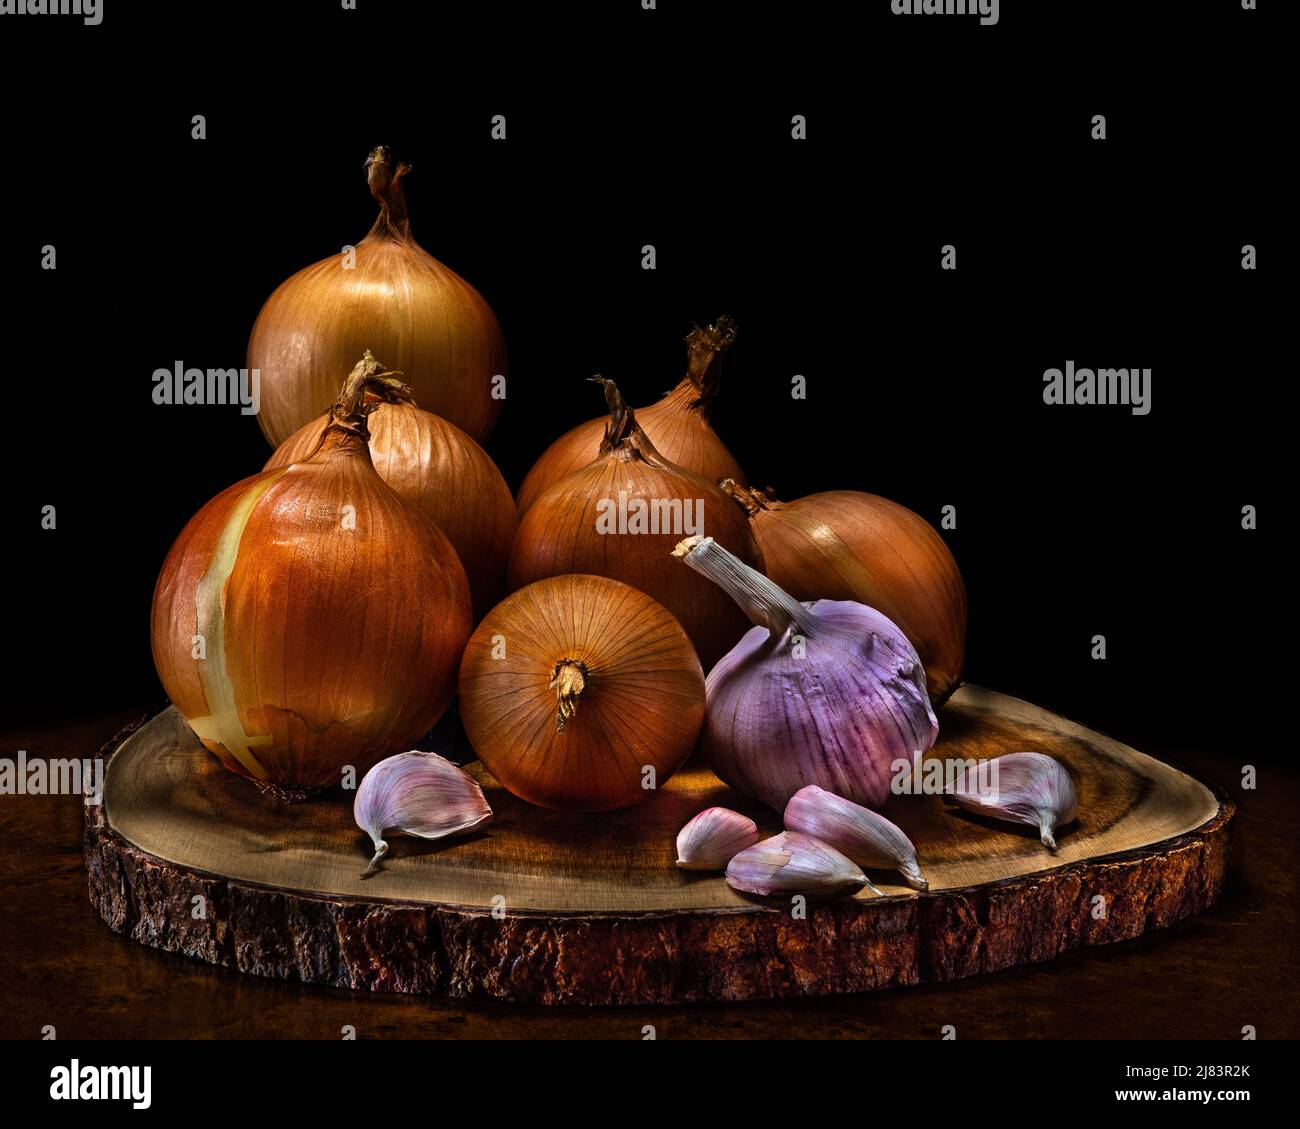 Onion and garlic on a wooden stand. Onion and garlic dishes help to effectively eliminate bacteria, fungi and viruses, preventing many infectious. Stock Photo